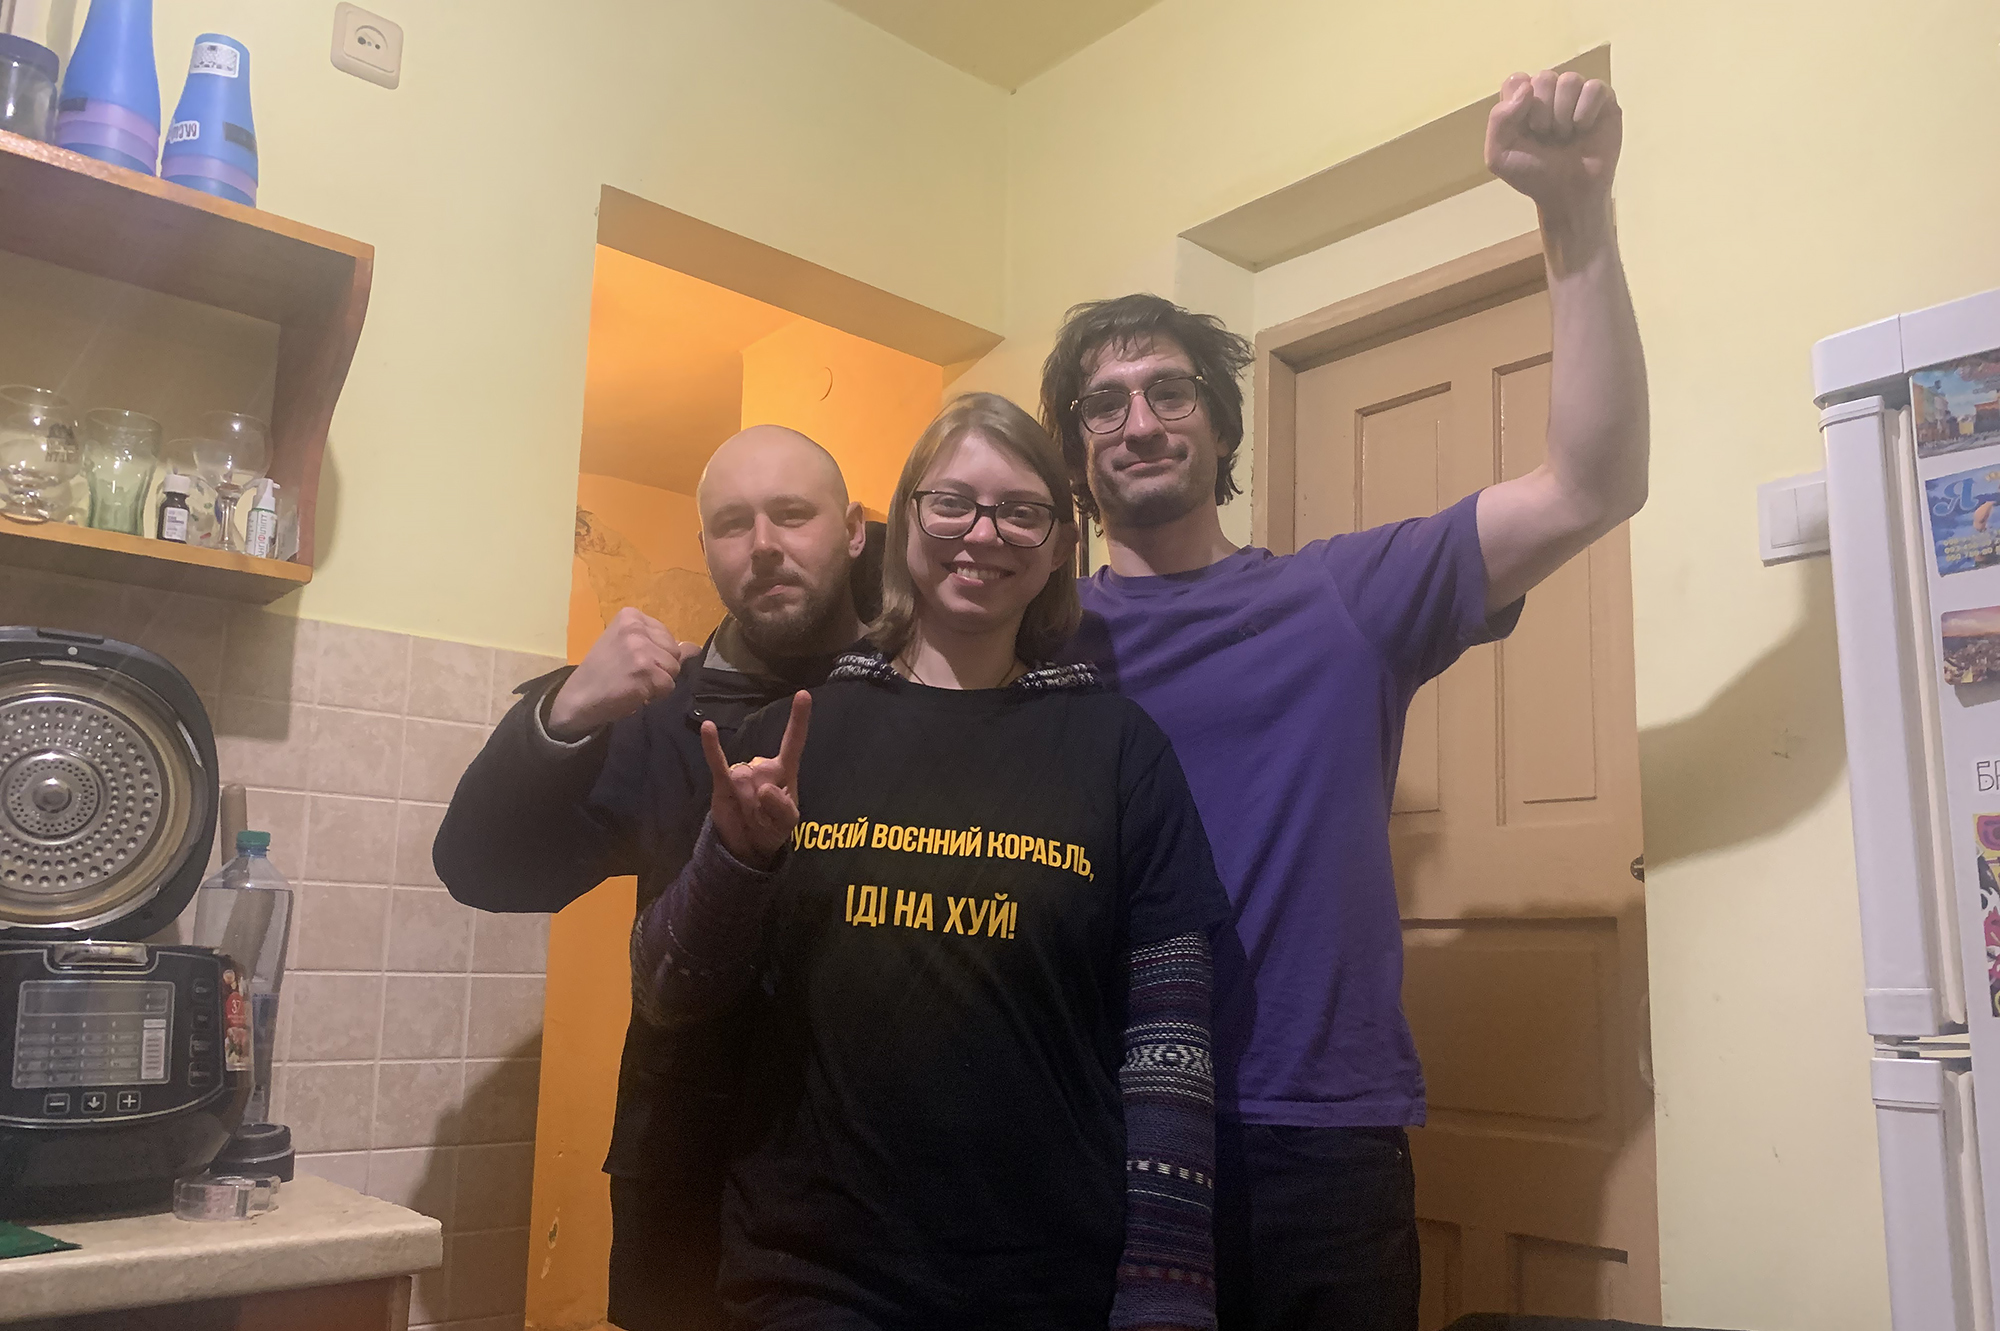 A bald man makes a fist, a woman gives a rock on gesture, and Sam Finkelman shows a raised fist in a kitchen in Ukraine.